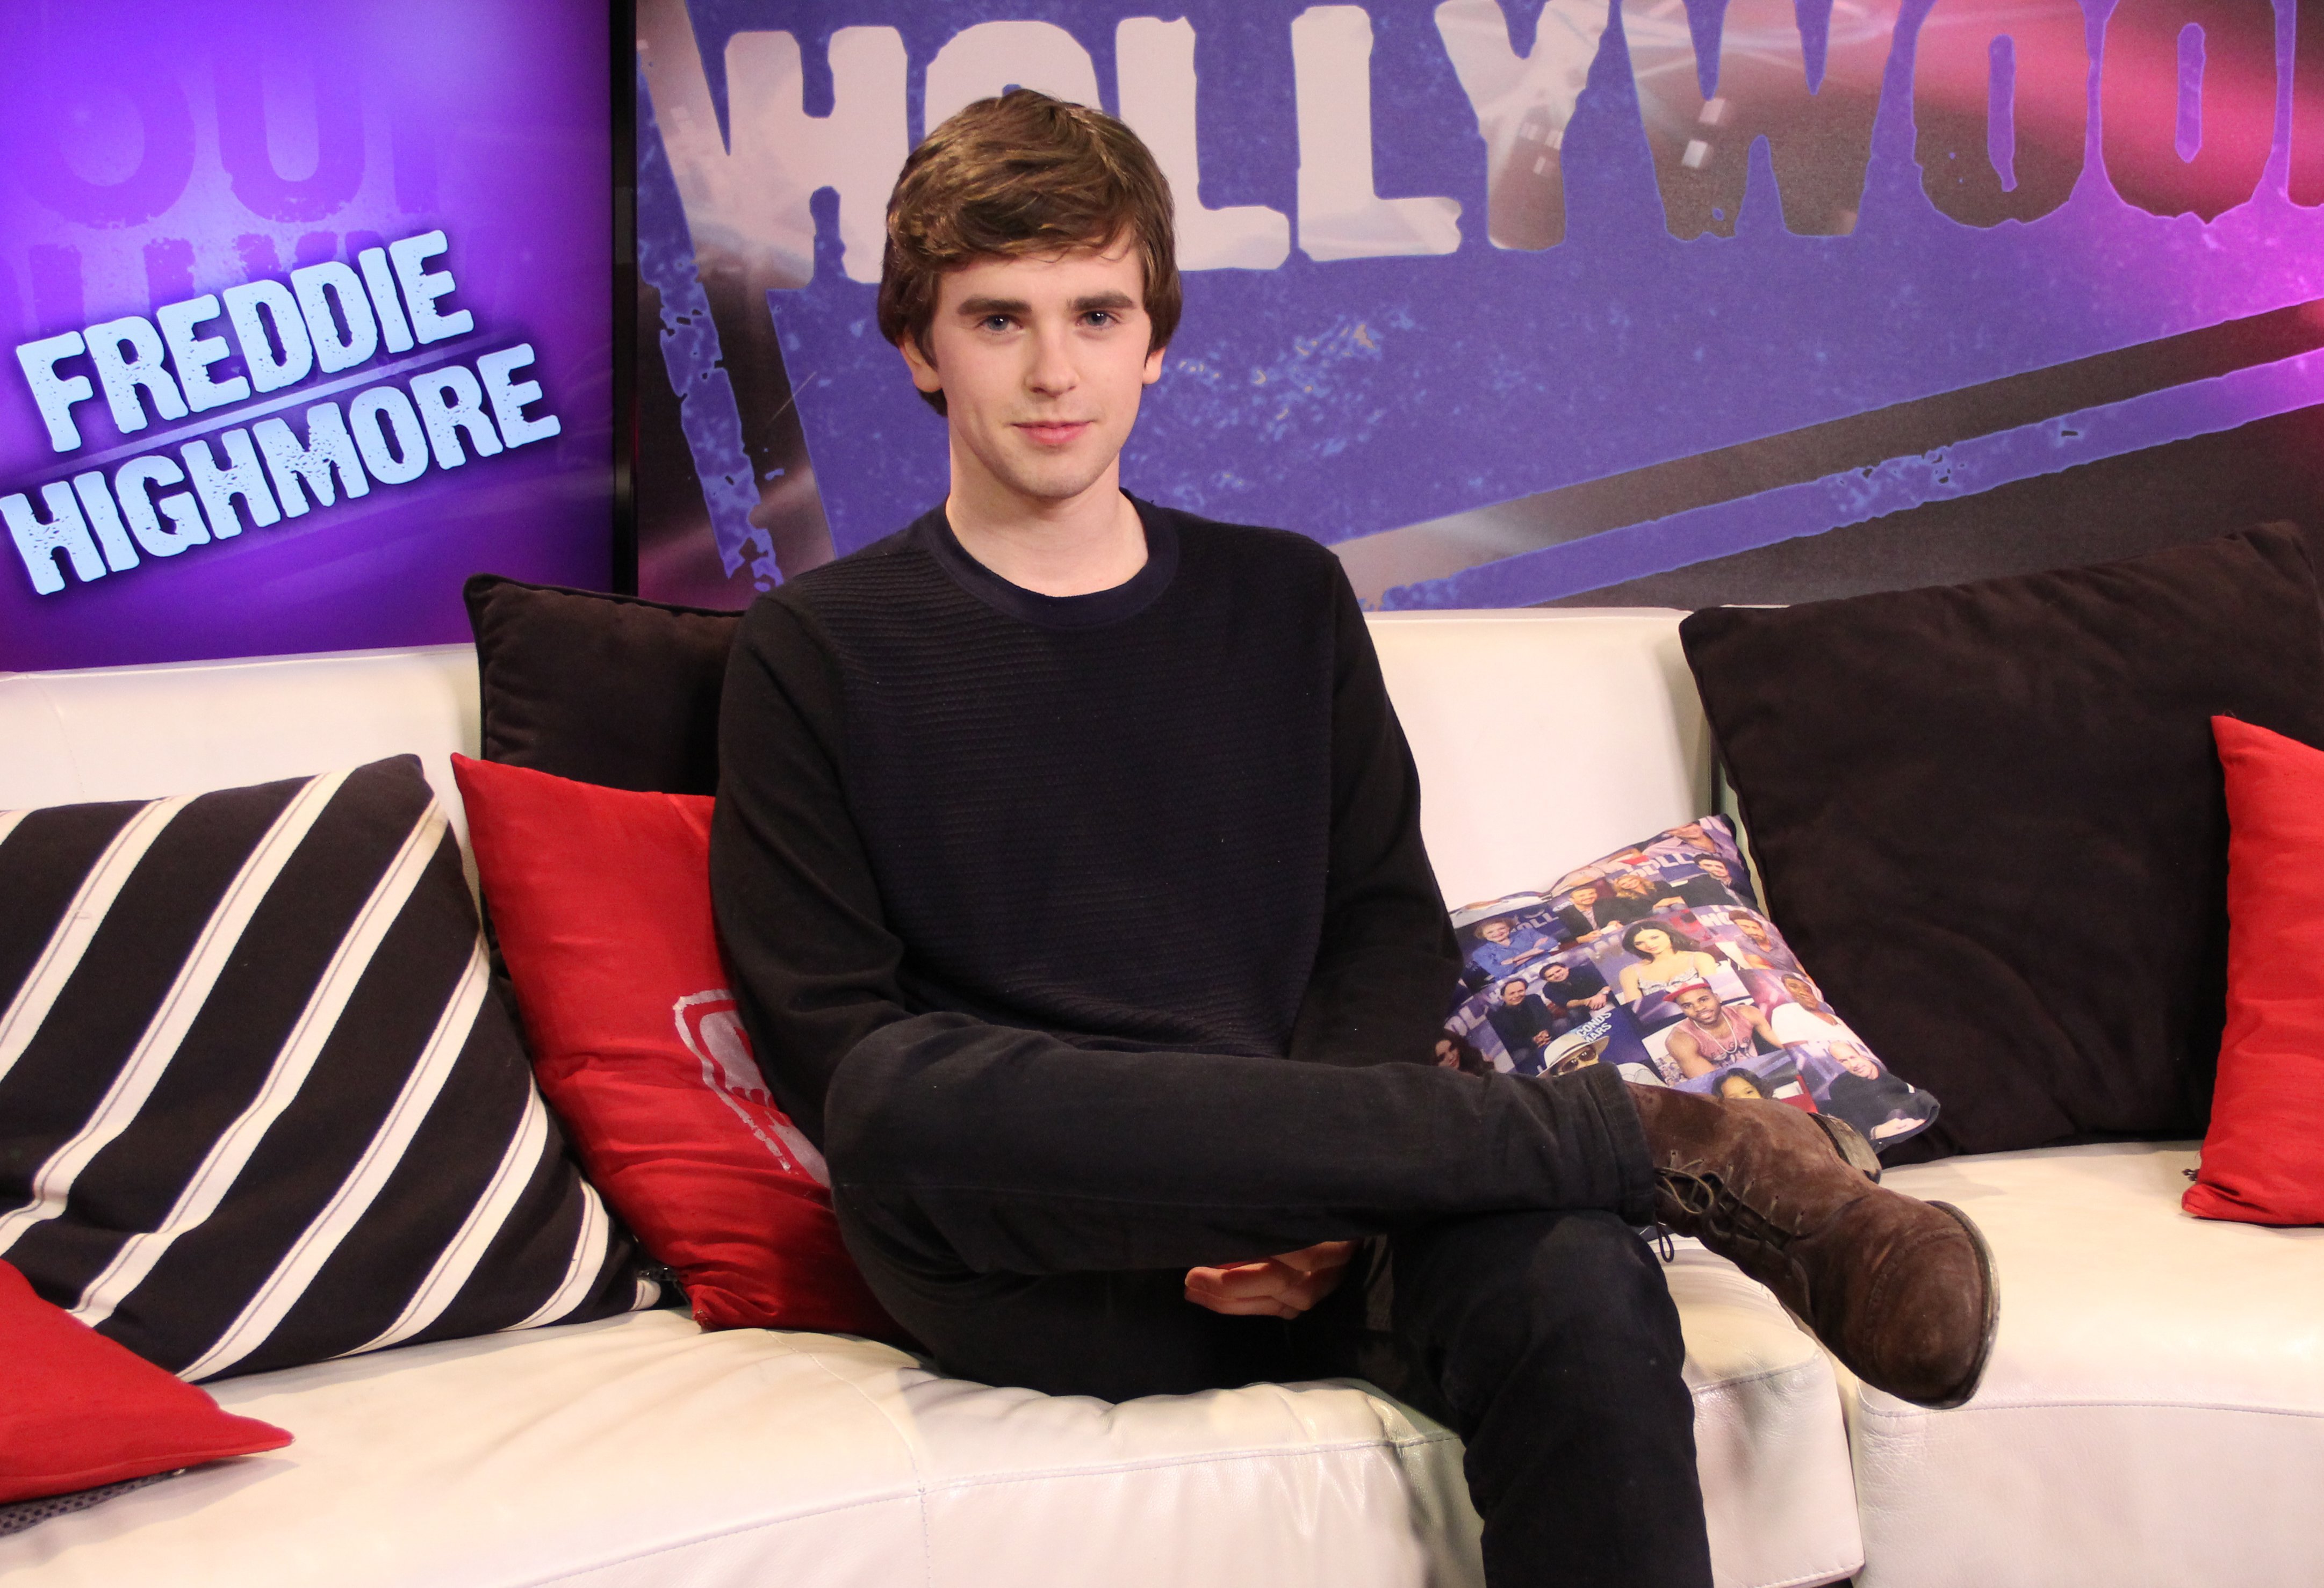 Freddie Highmore visits the Young Hollywood Studio in Los Angeles, California on March 3, 2015 | Photo: Getty Images